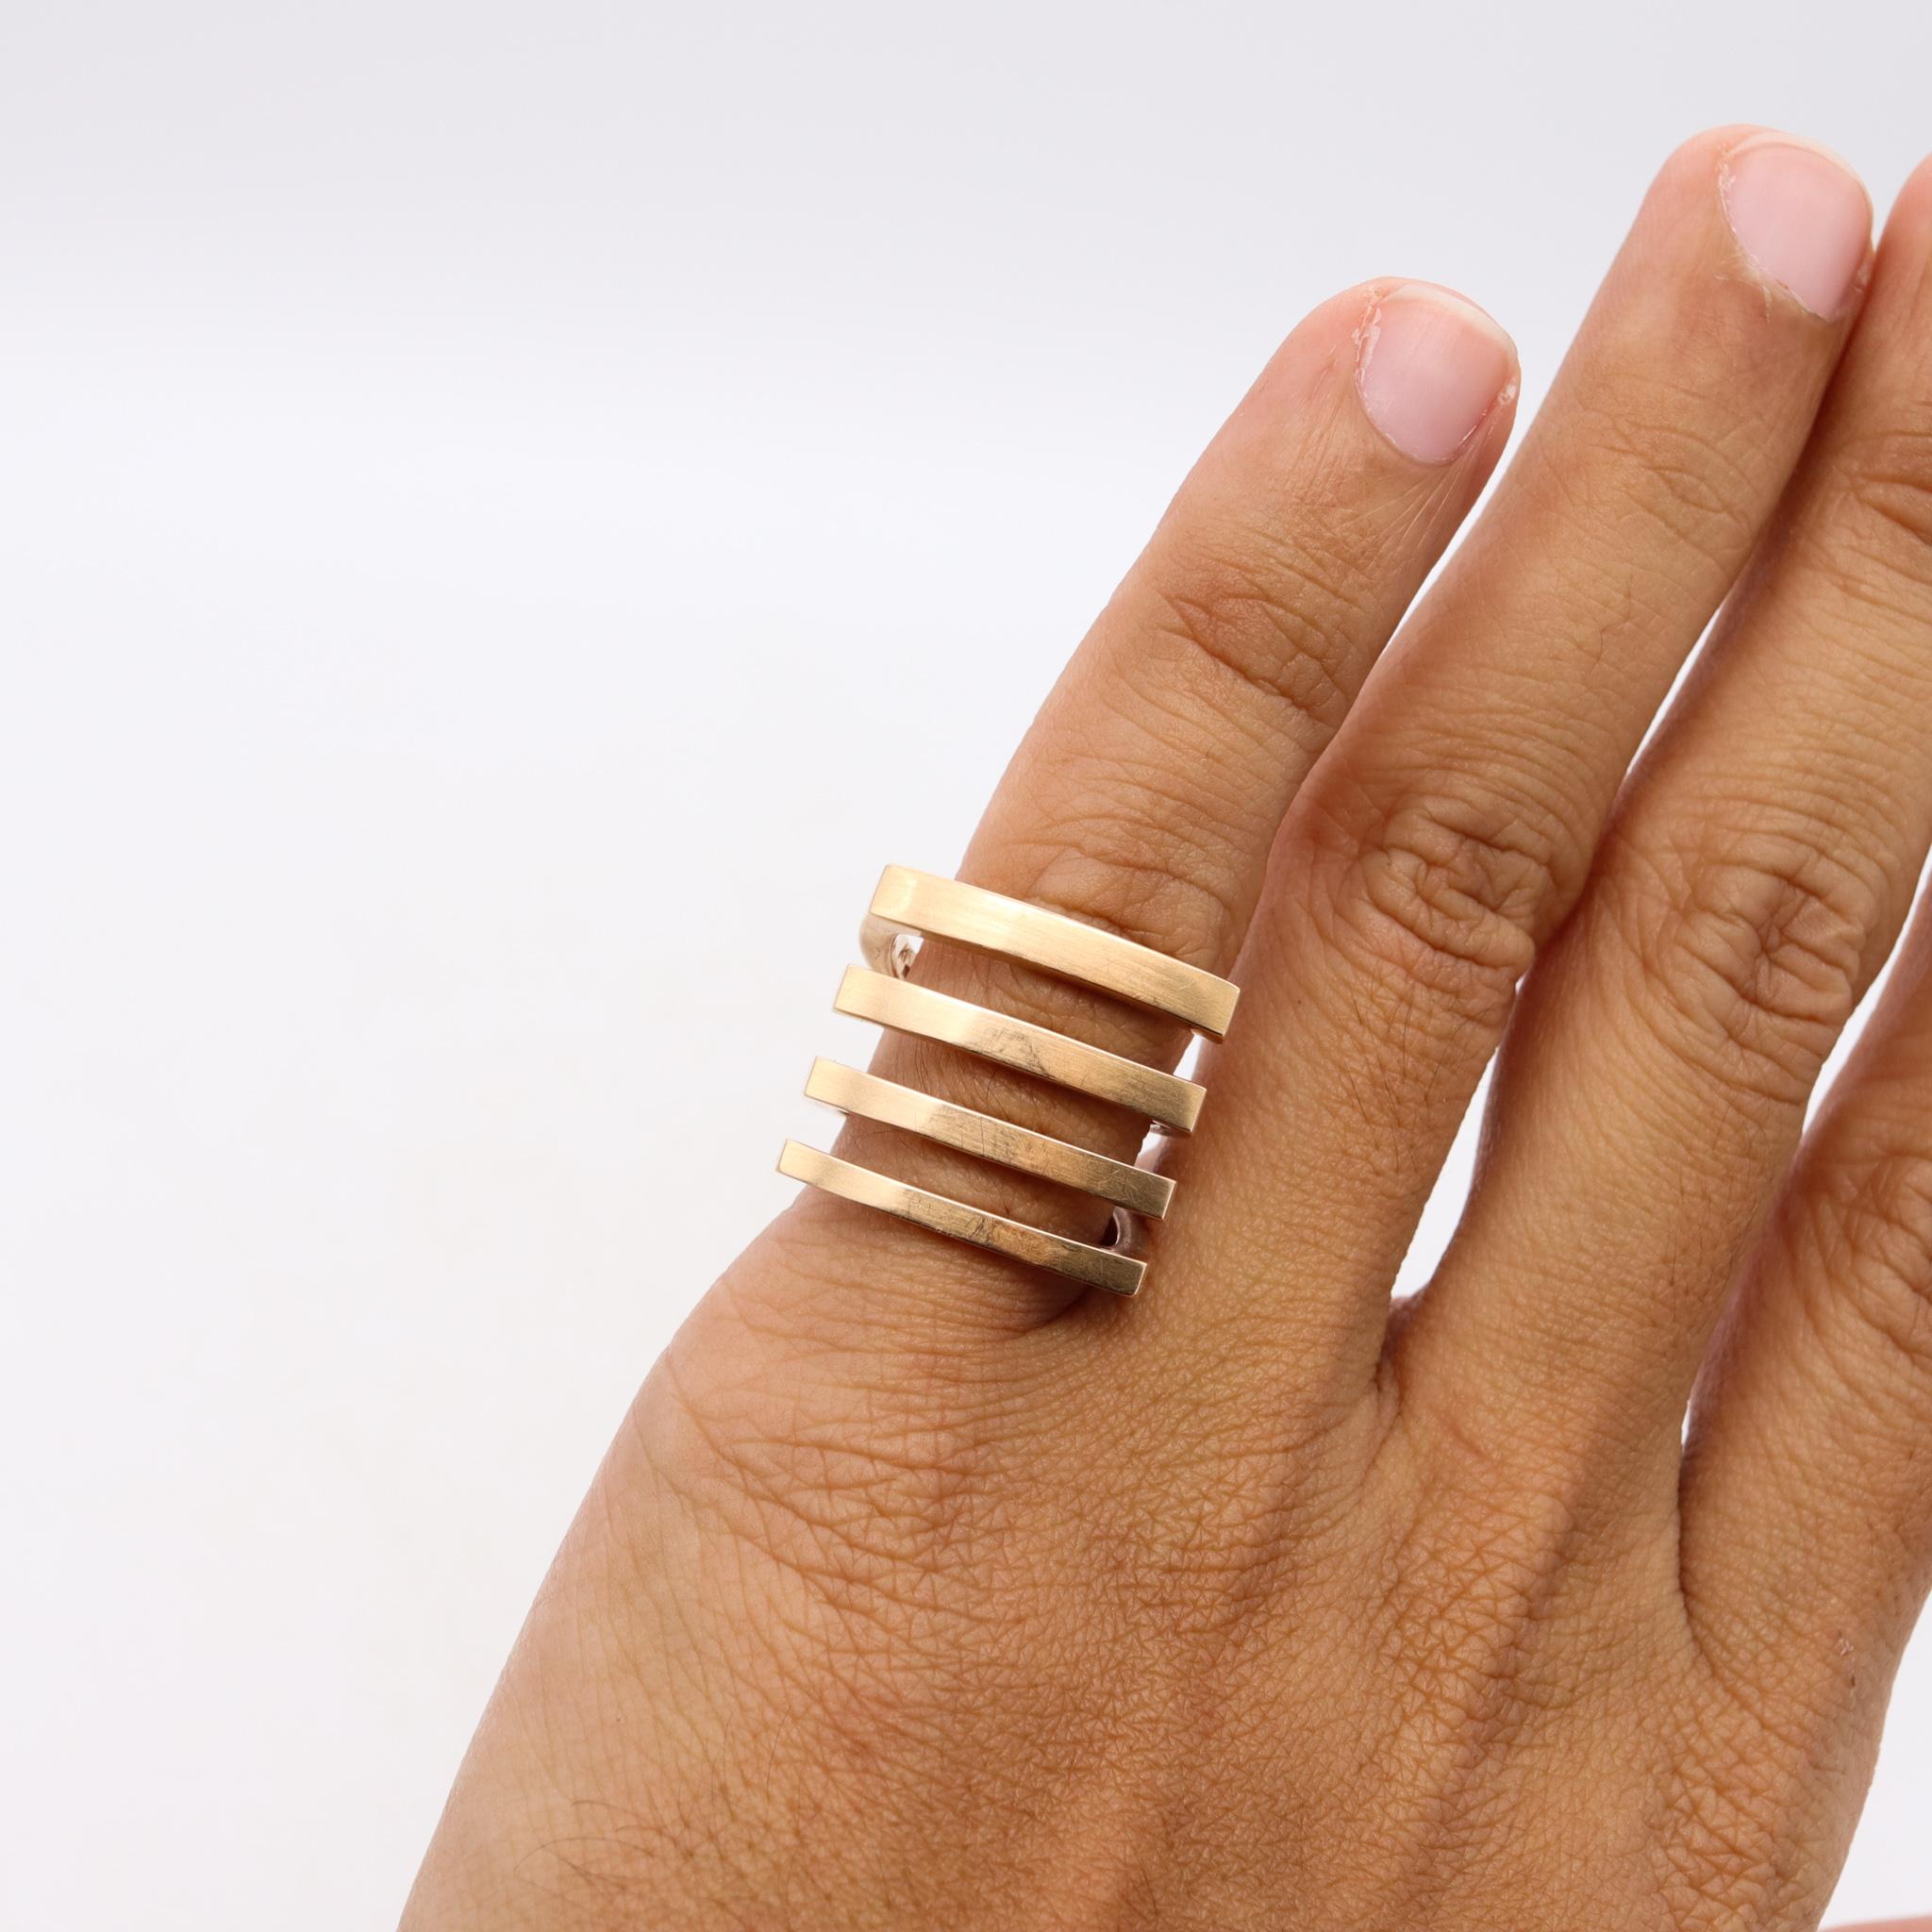 Modernist Germany Swiss Bauhaus Modernism Sculptural Geometric Ring in Solid 18Kt Gold For Sale